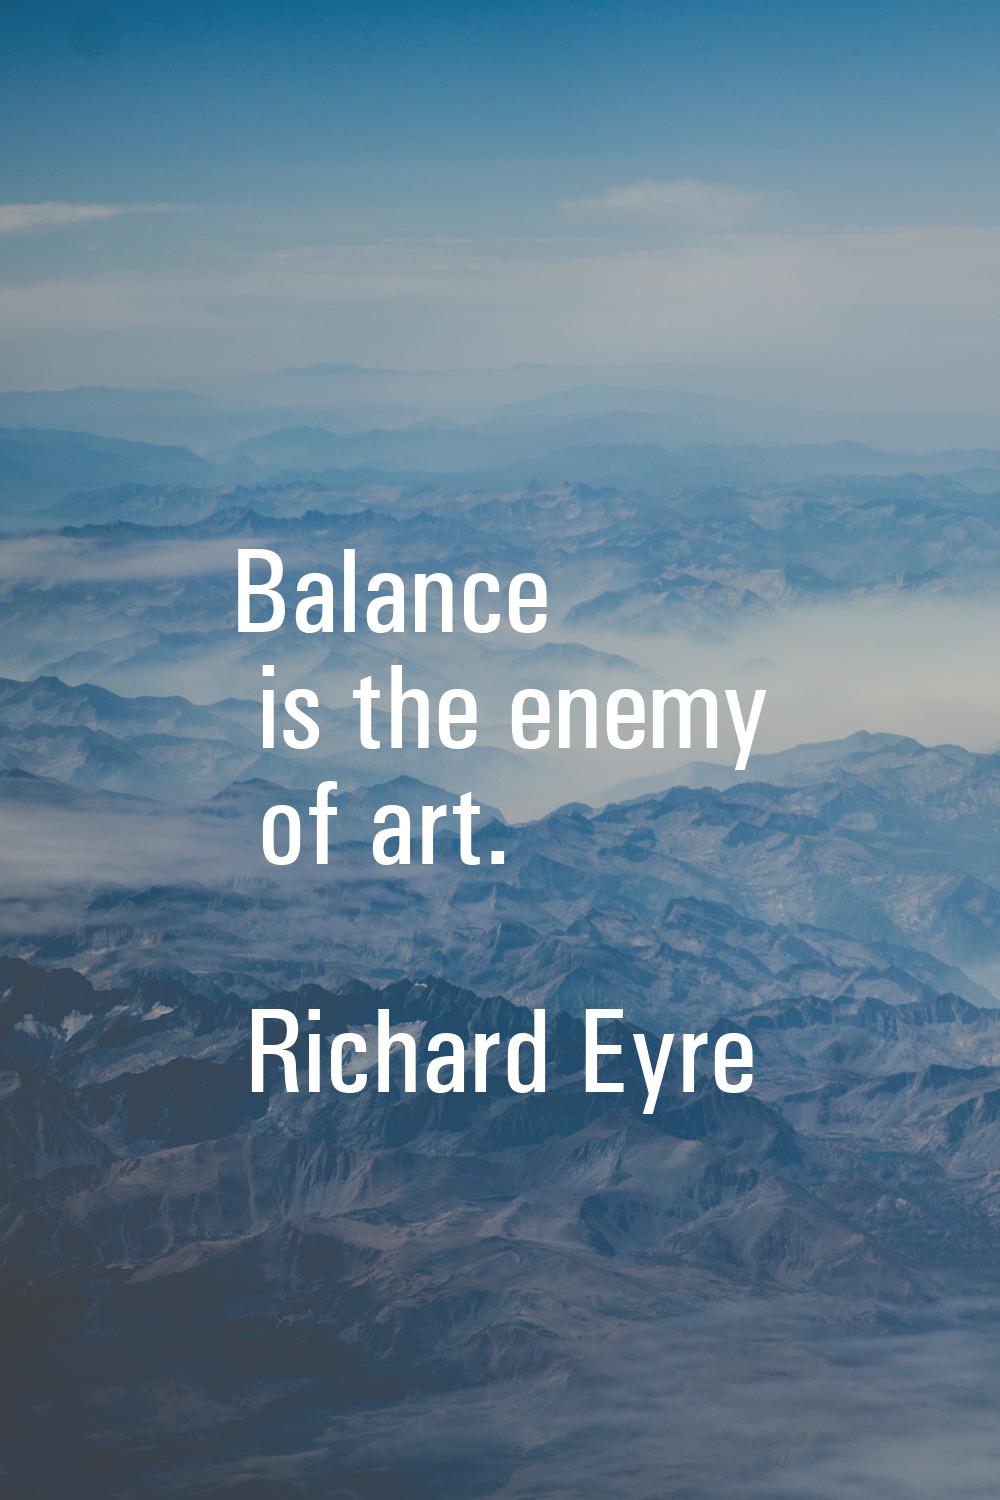 Balance is the enemy of art.